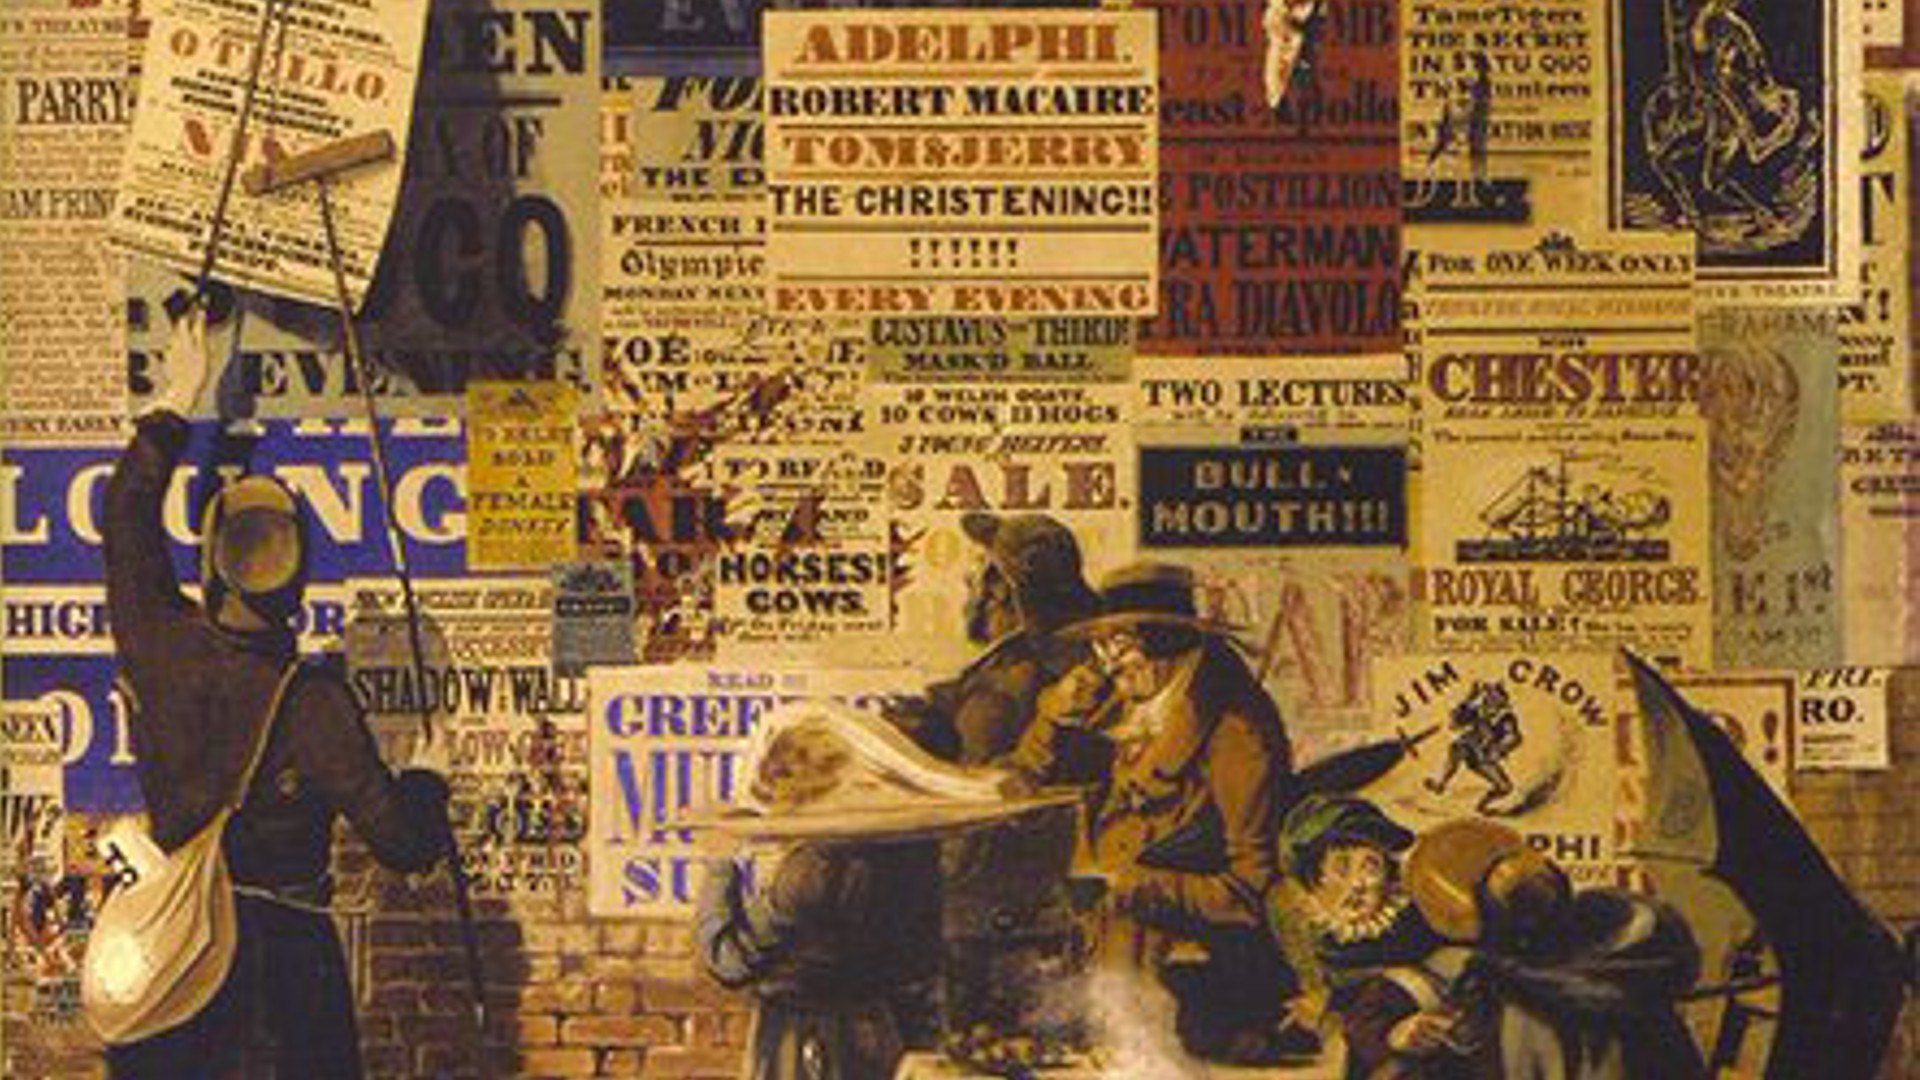 Crop from an EHU Nineteen promo flyer. It shows a group of individuals on the street, watching a man paste a poster for 'Othello' on a wall plastered with posters and clippings.